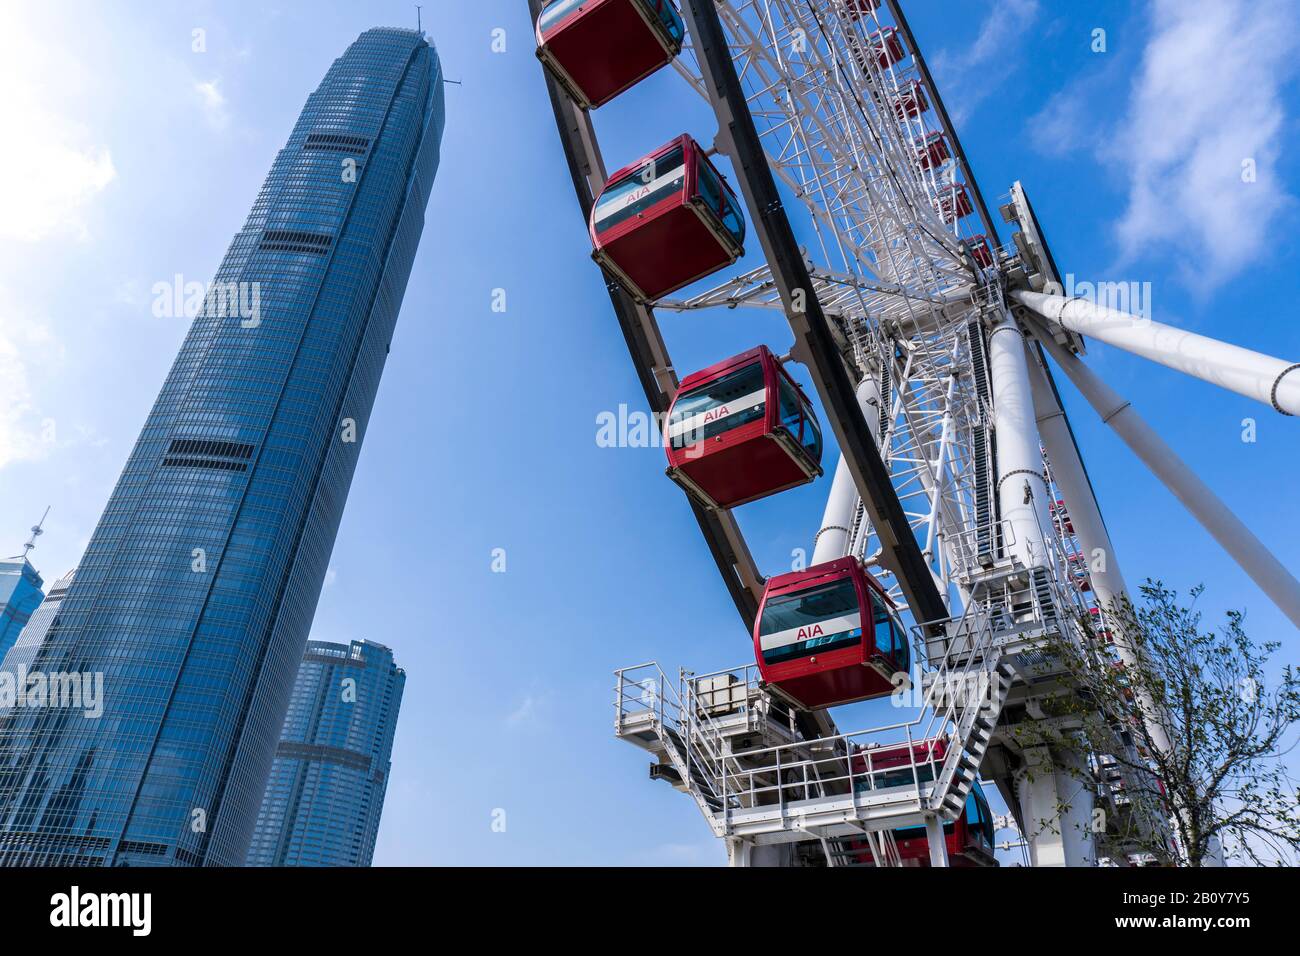 Hong Kong - January 18 2020 : The Hong Kong Observation Wheel and International Finance Center in Central, Close Up, Dutch Angle View Stock Photo